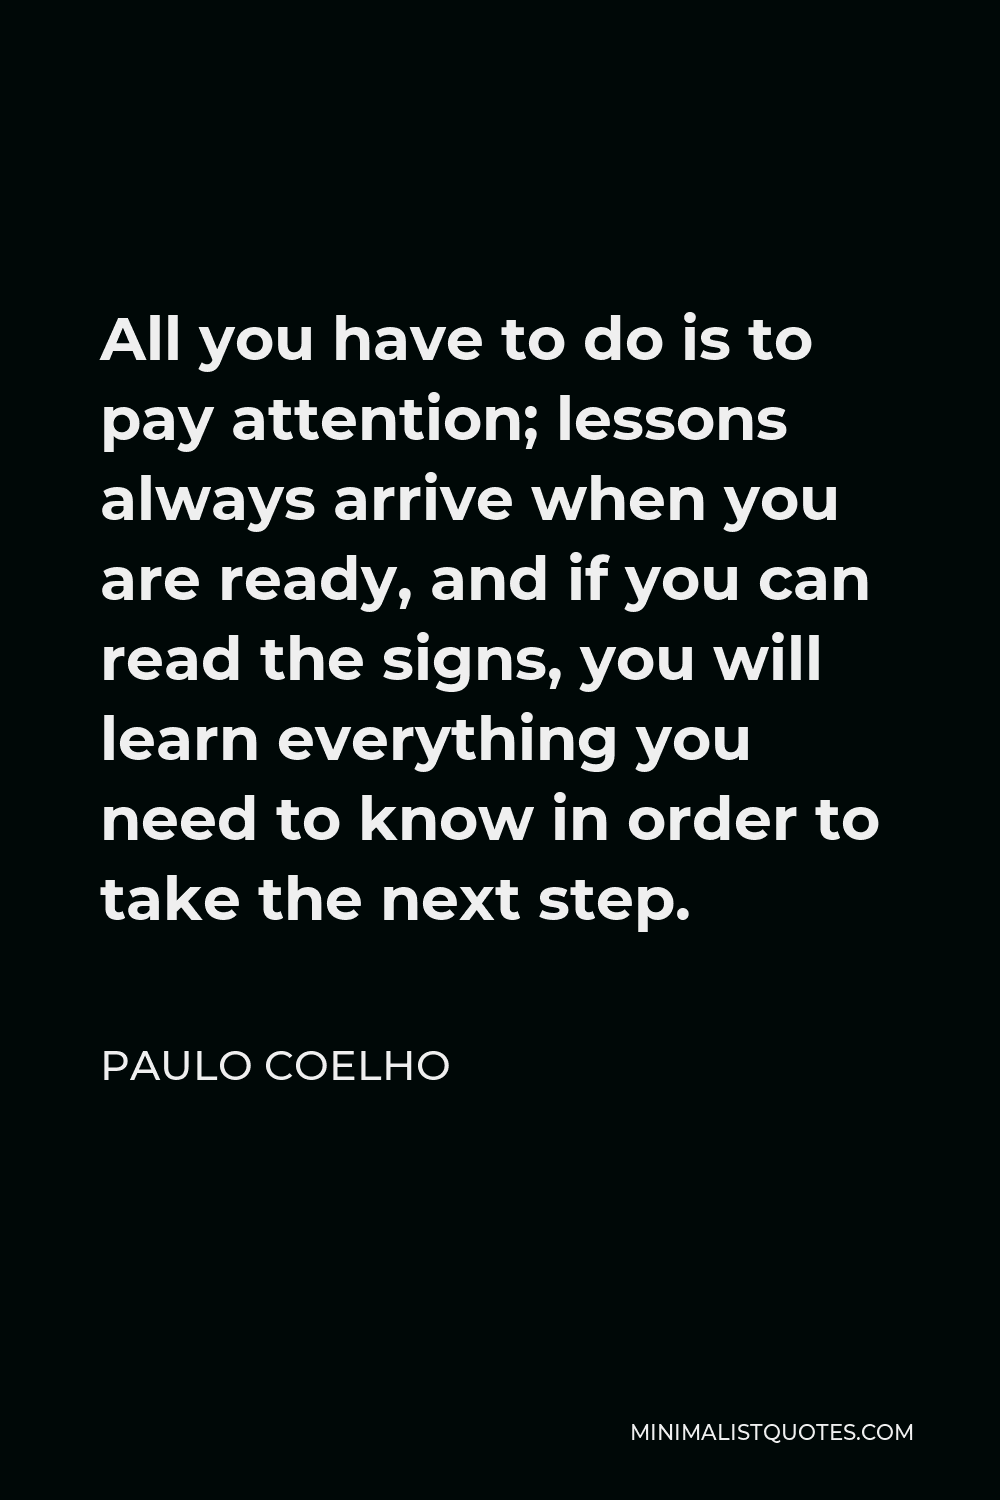 Paulo Coelho Quote - All you have to do is to pay attention; lessons always arrive when you are ready, and if you can read the signs, you will learn everything you need to know in order to take the next step.